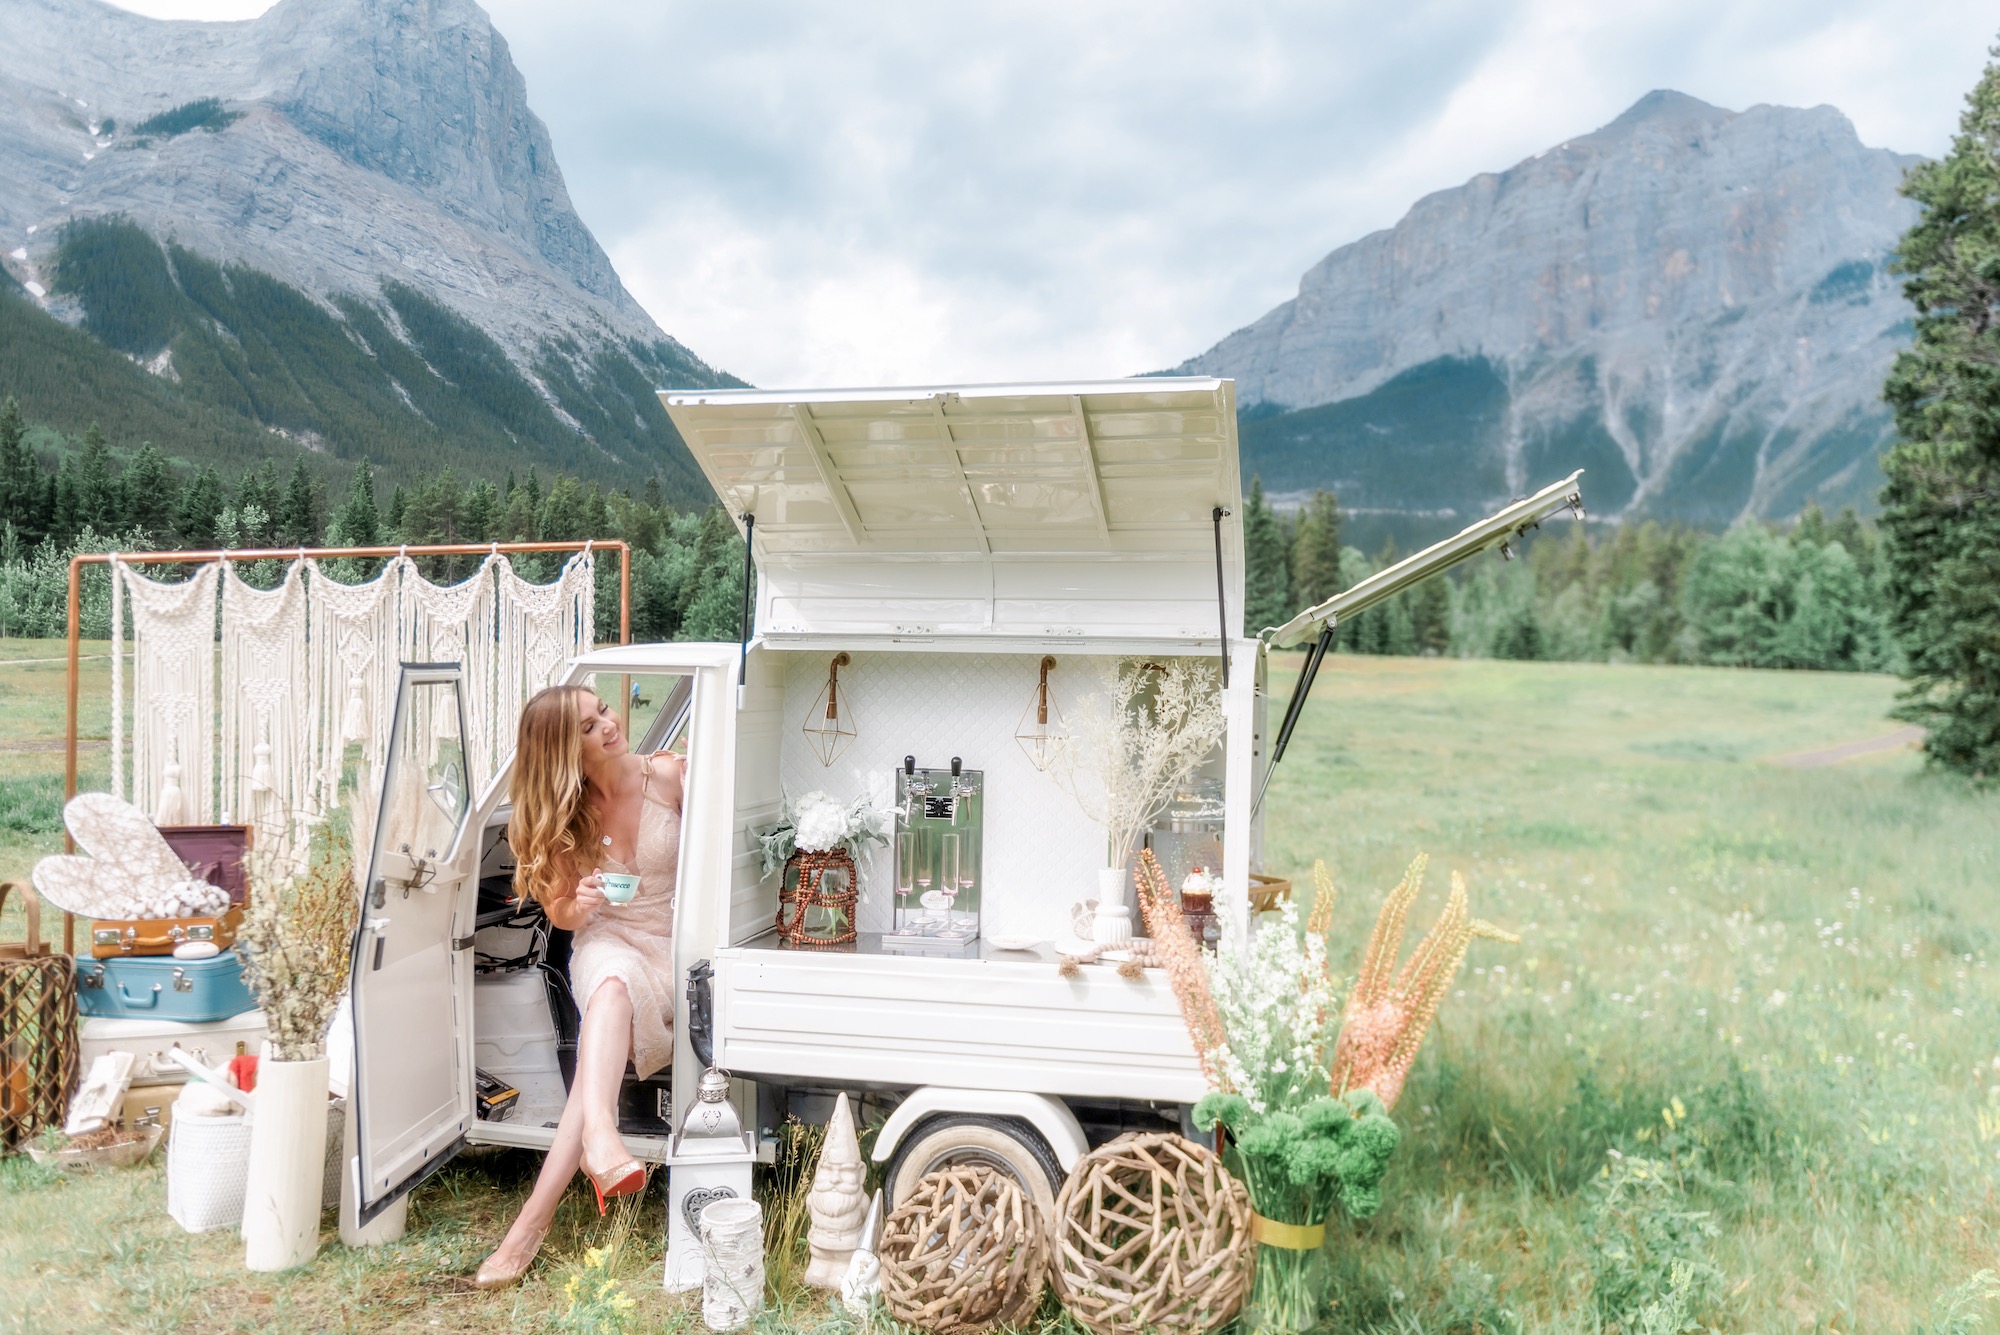 Mobile champagne truck for parties and weddings set up in Canmore